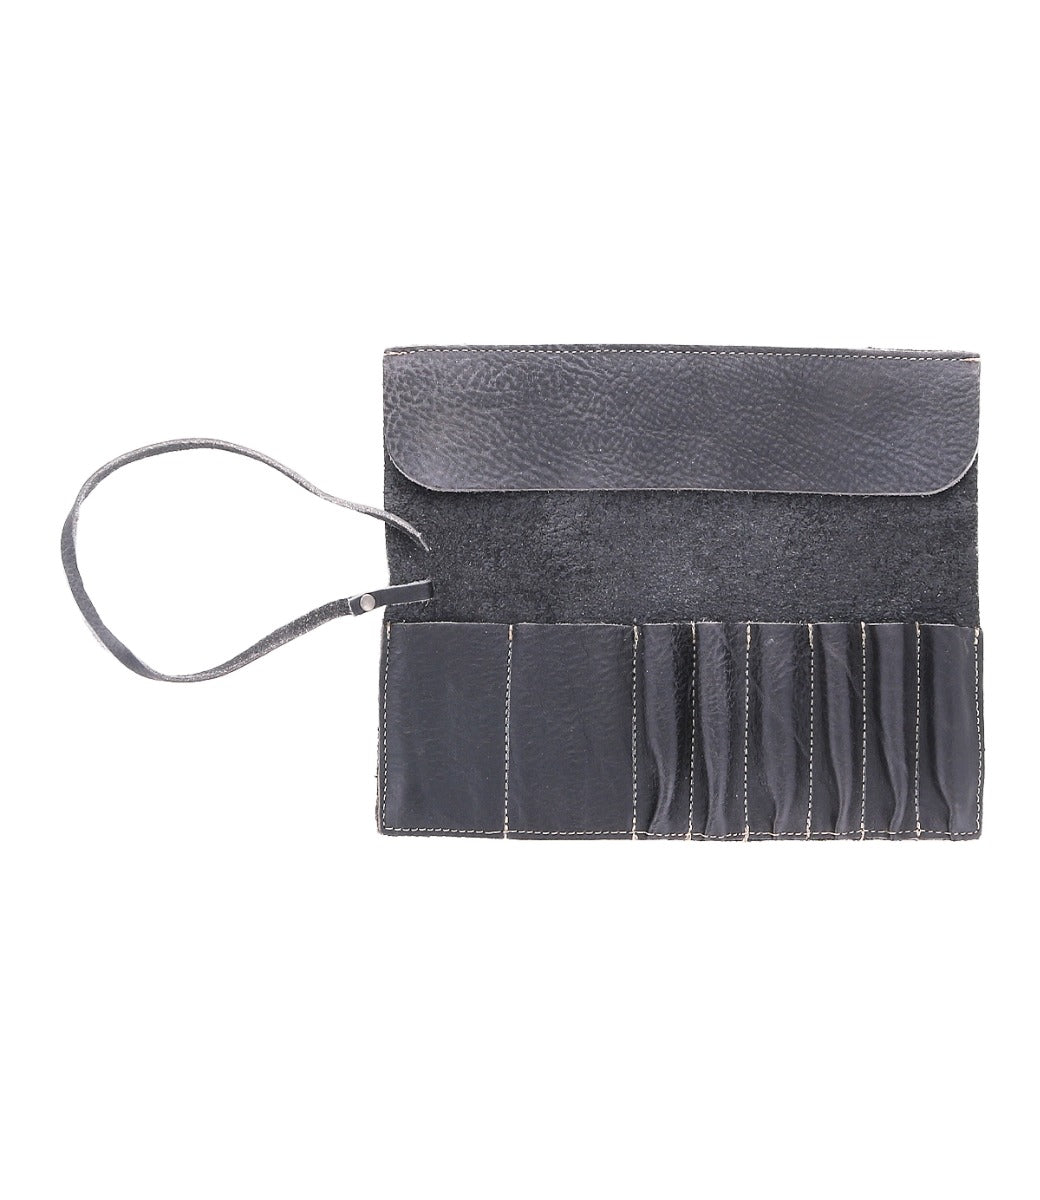 A Prepped black leather wallet with a zipper from Bed Stu.